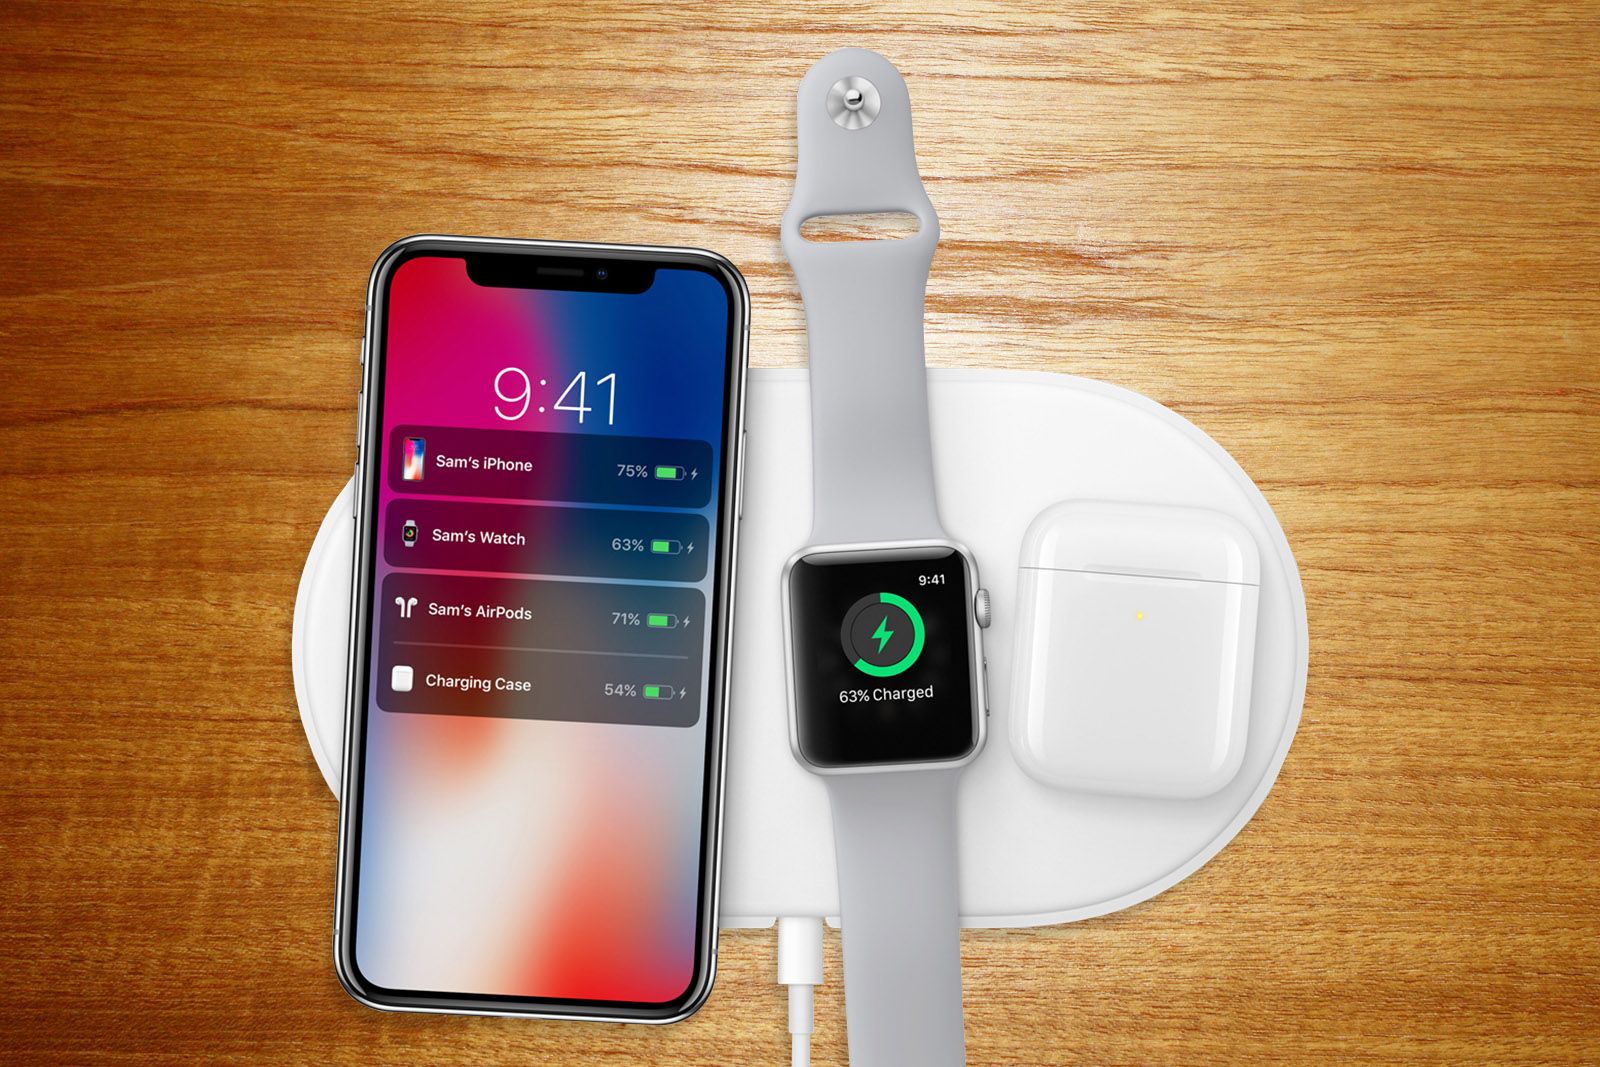 Apple Airpower Charging Mat Confirmed To Be Coming Soon By Airpods 2 Box image 3